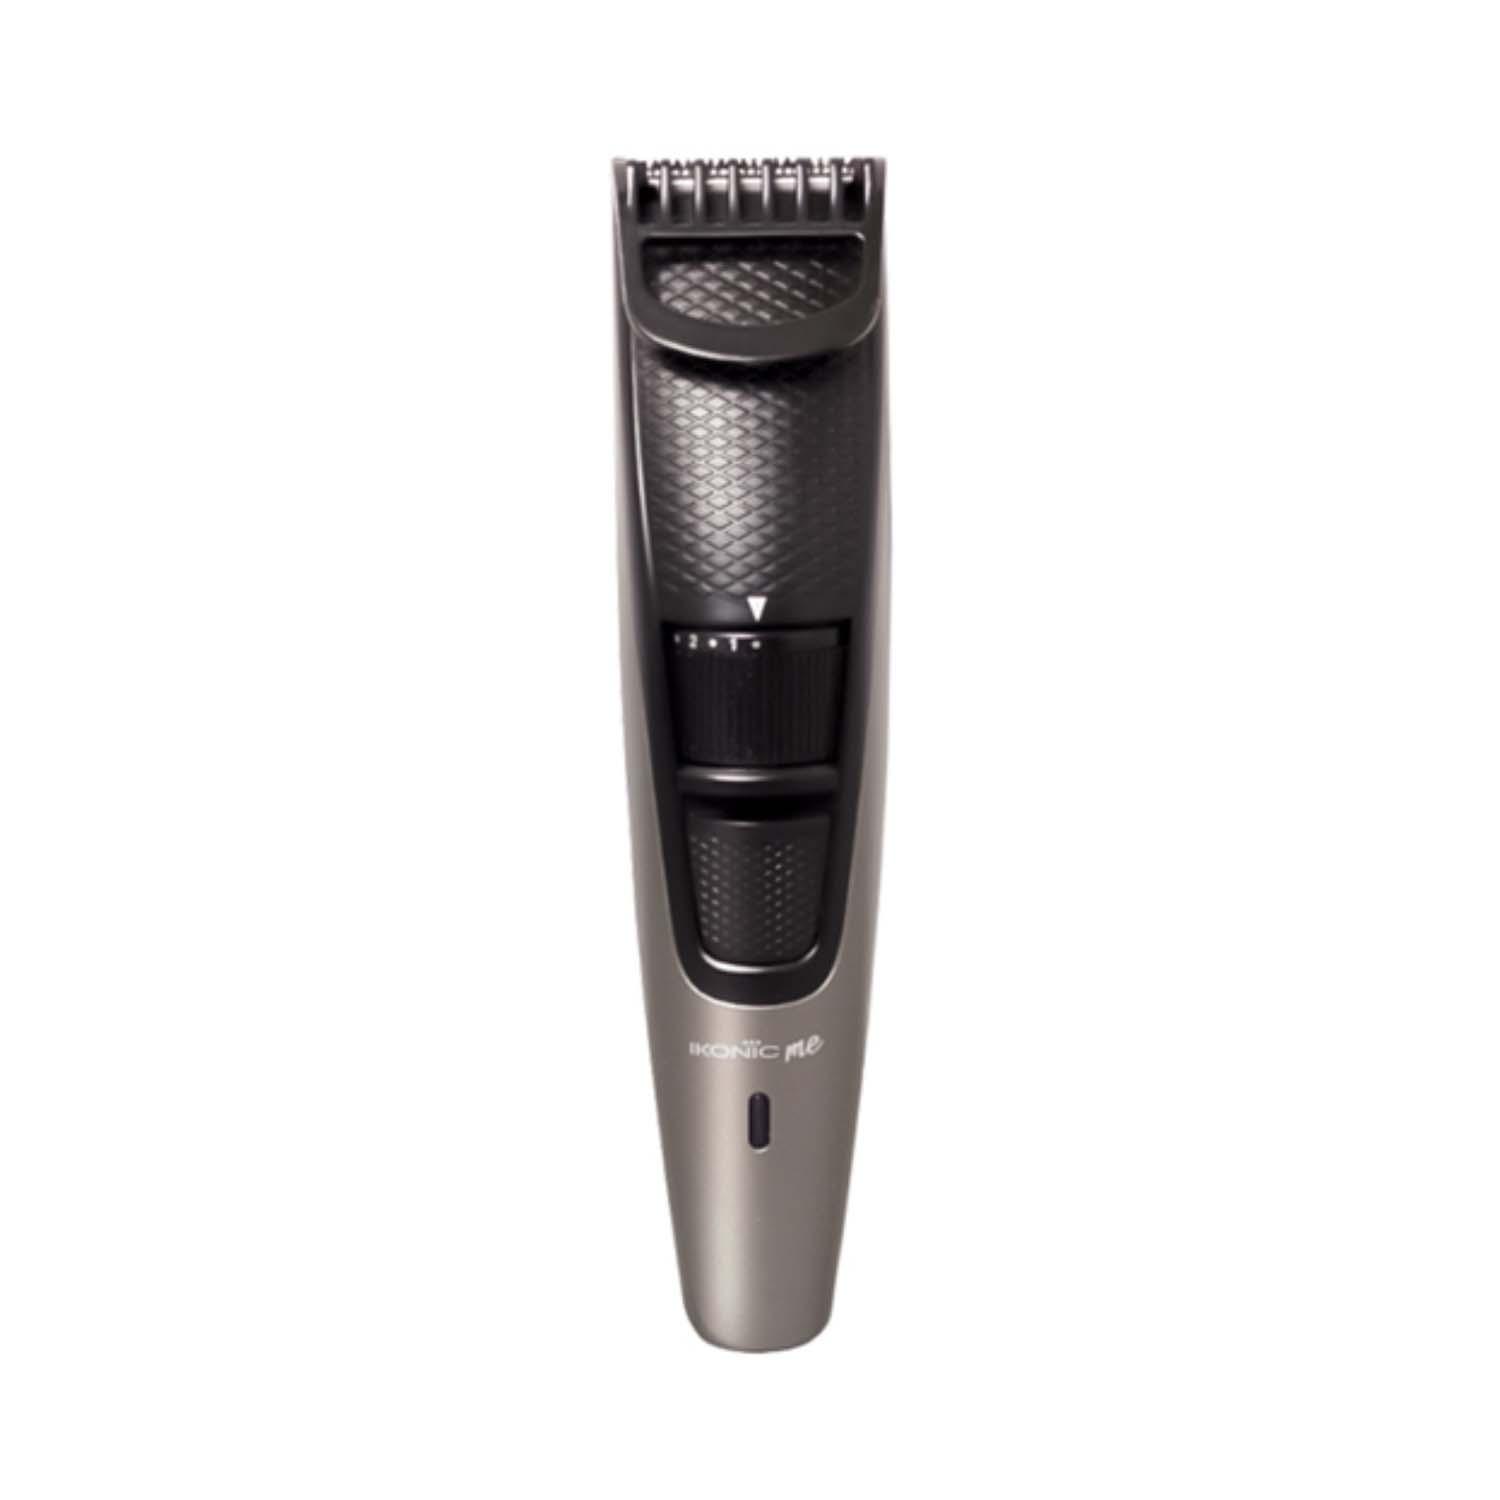 Ikonic Professional | Ikonic Professional Me Groom and Trim Trimmer